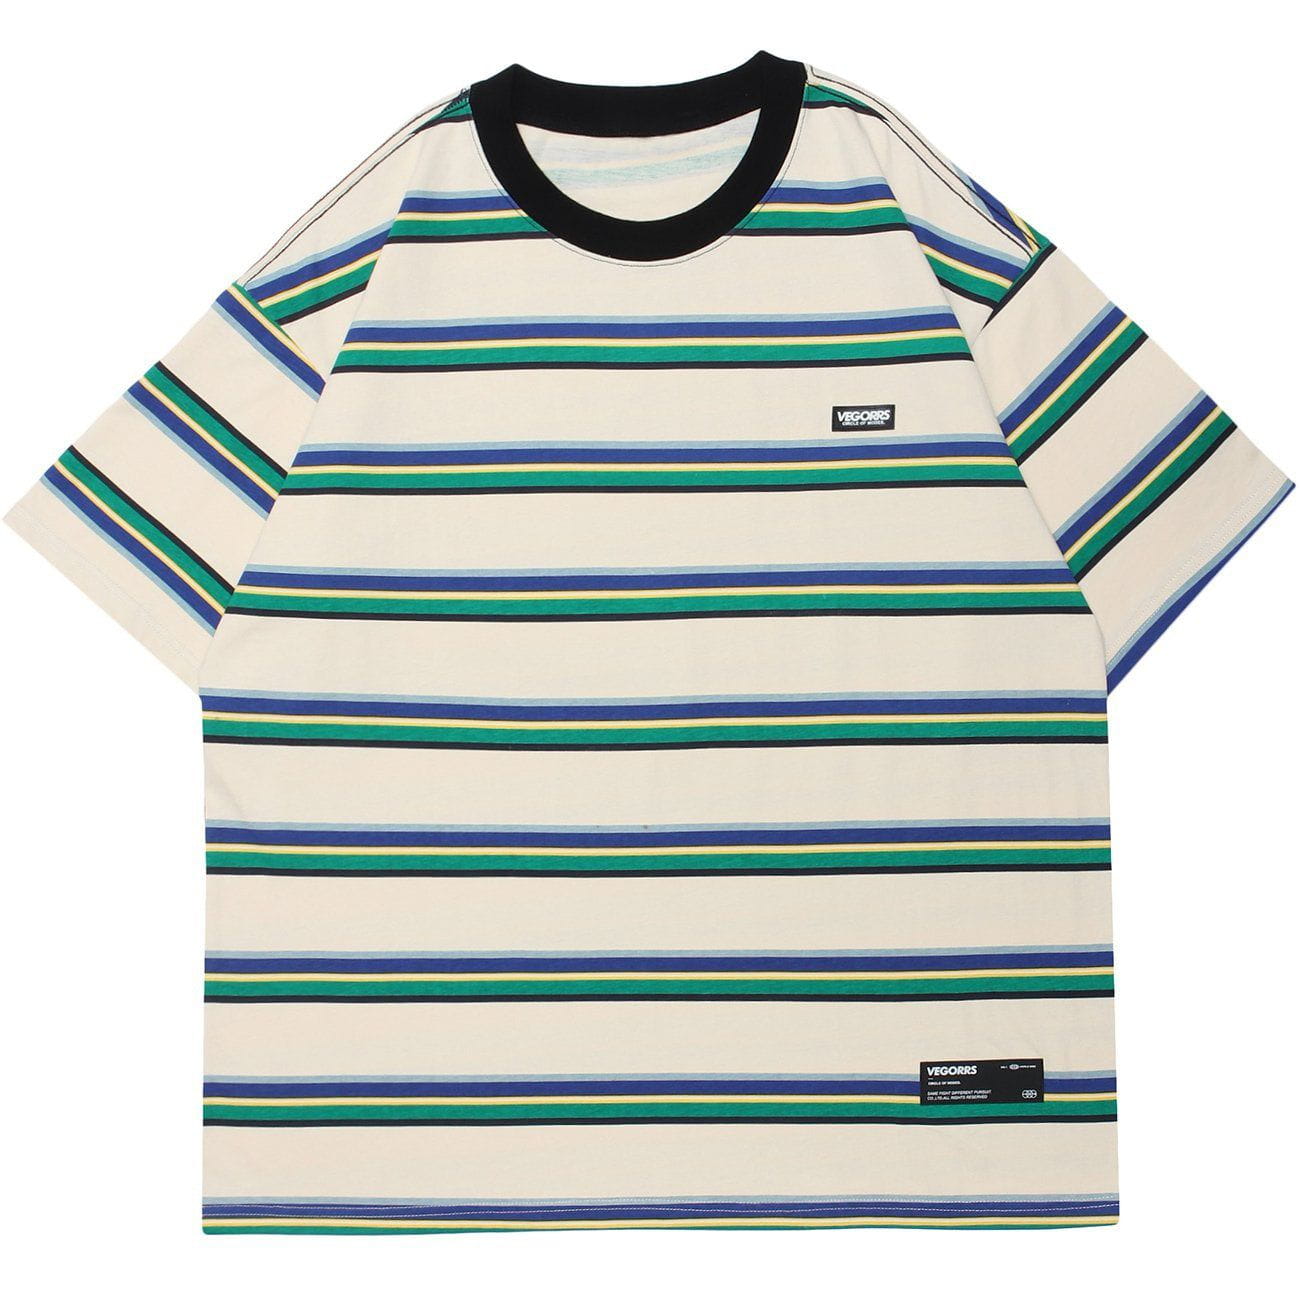 Striped Bright Color Matching T-Shirt